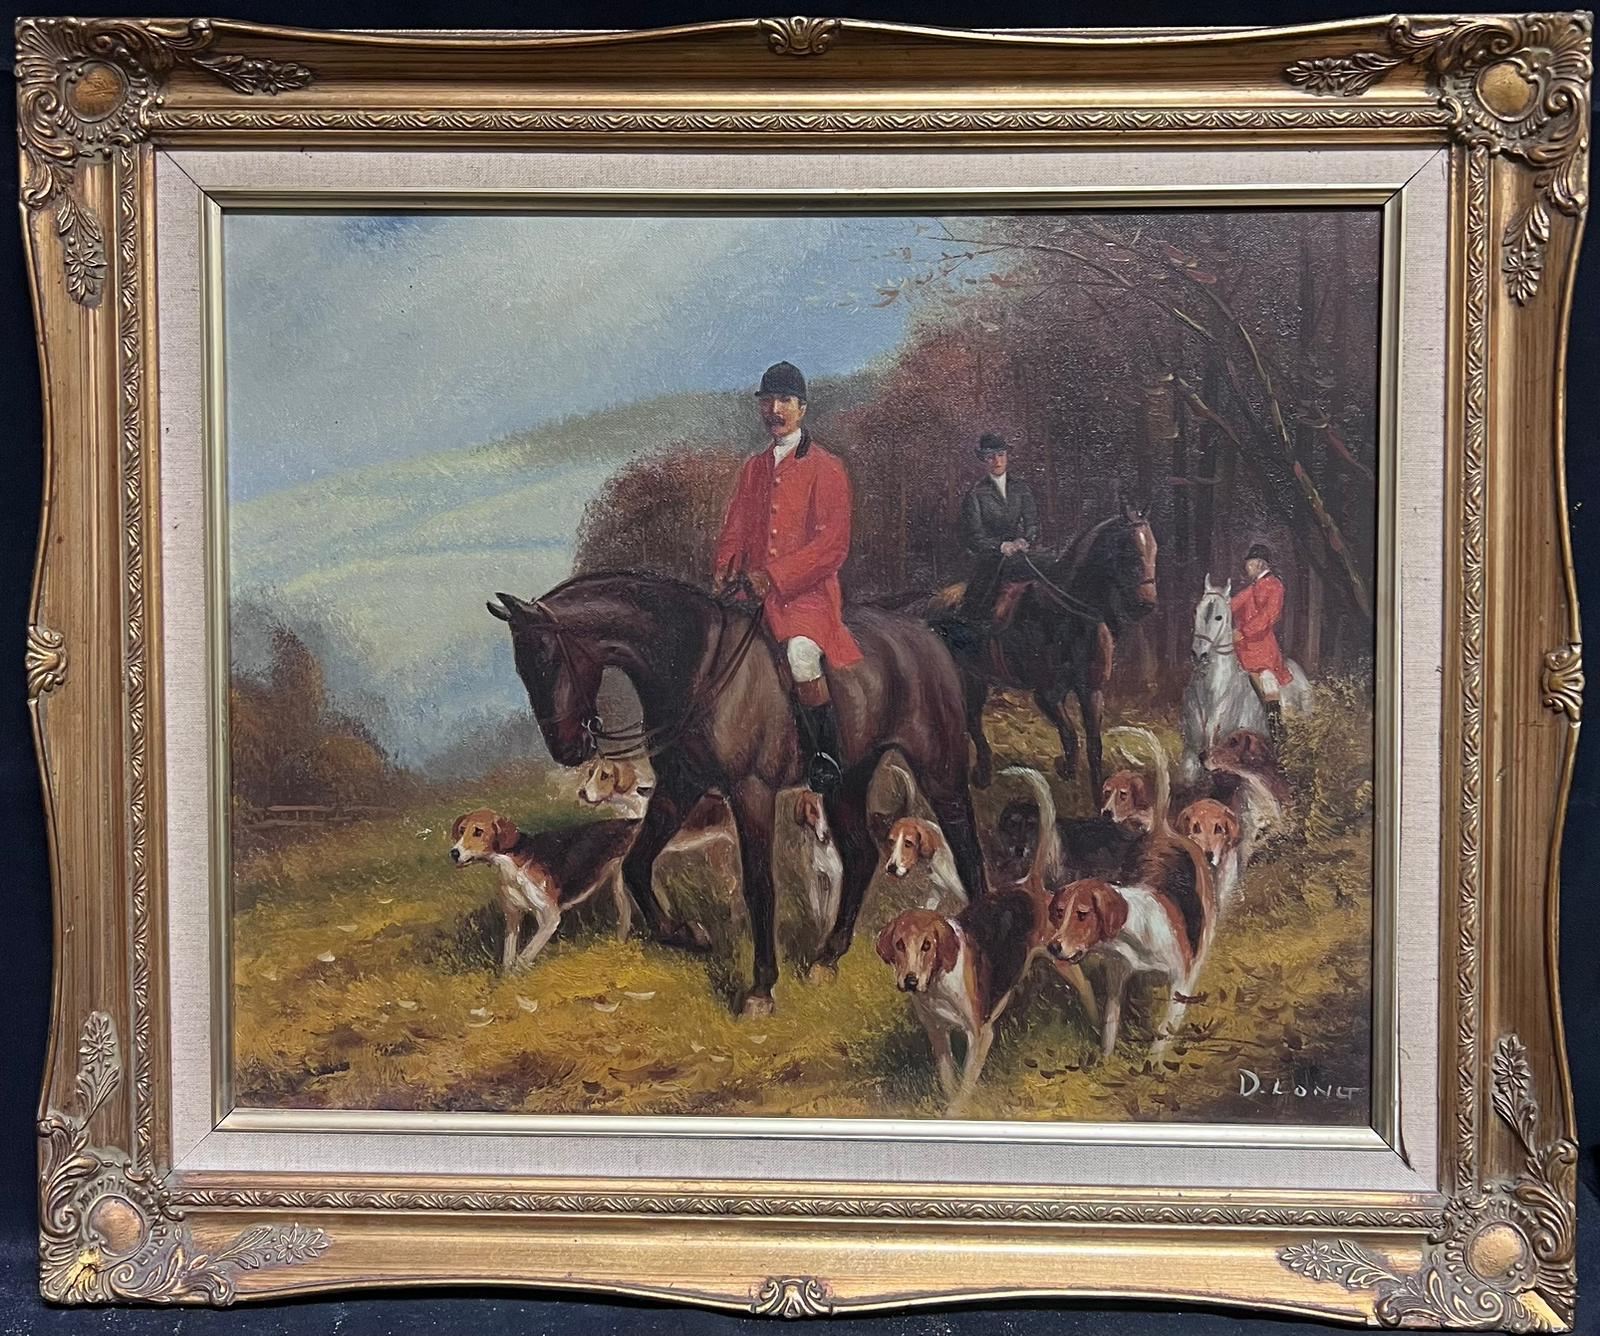 The English Hunting Party
late 20th century
signed oil on canvas, framed
framed: 21 x 25.5 inches
canvas: 16 x 20 inches
provenance: private collection, UK
condition: very good and sound condition 